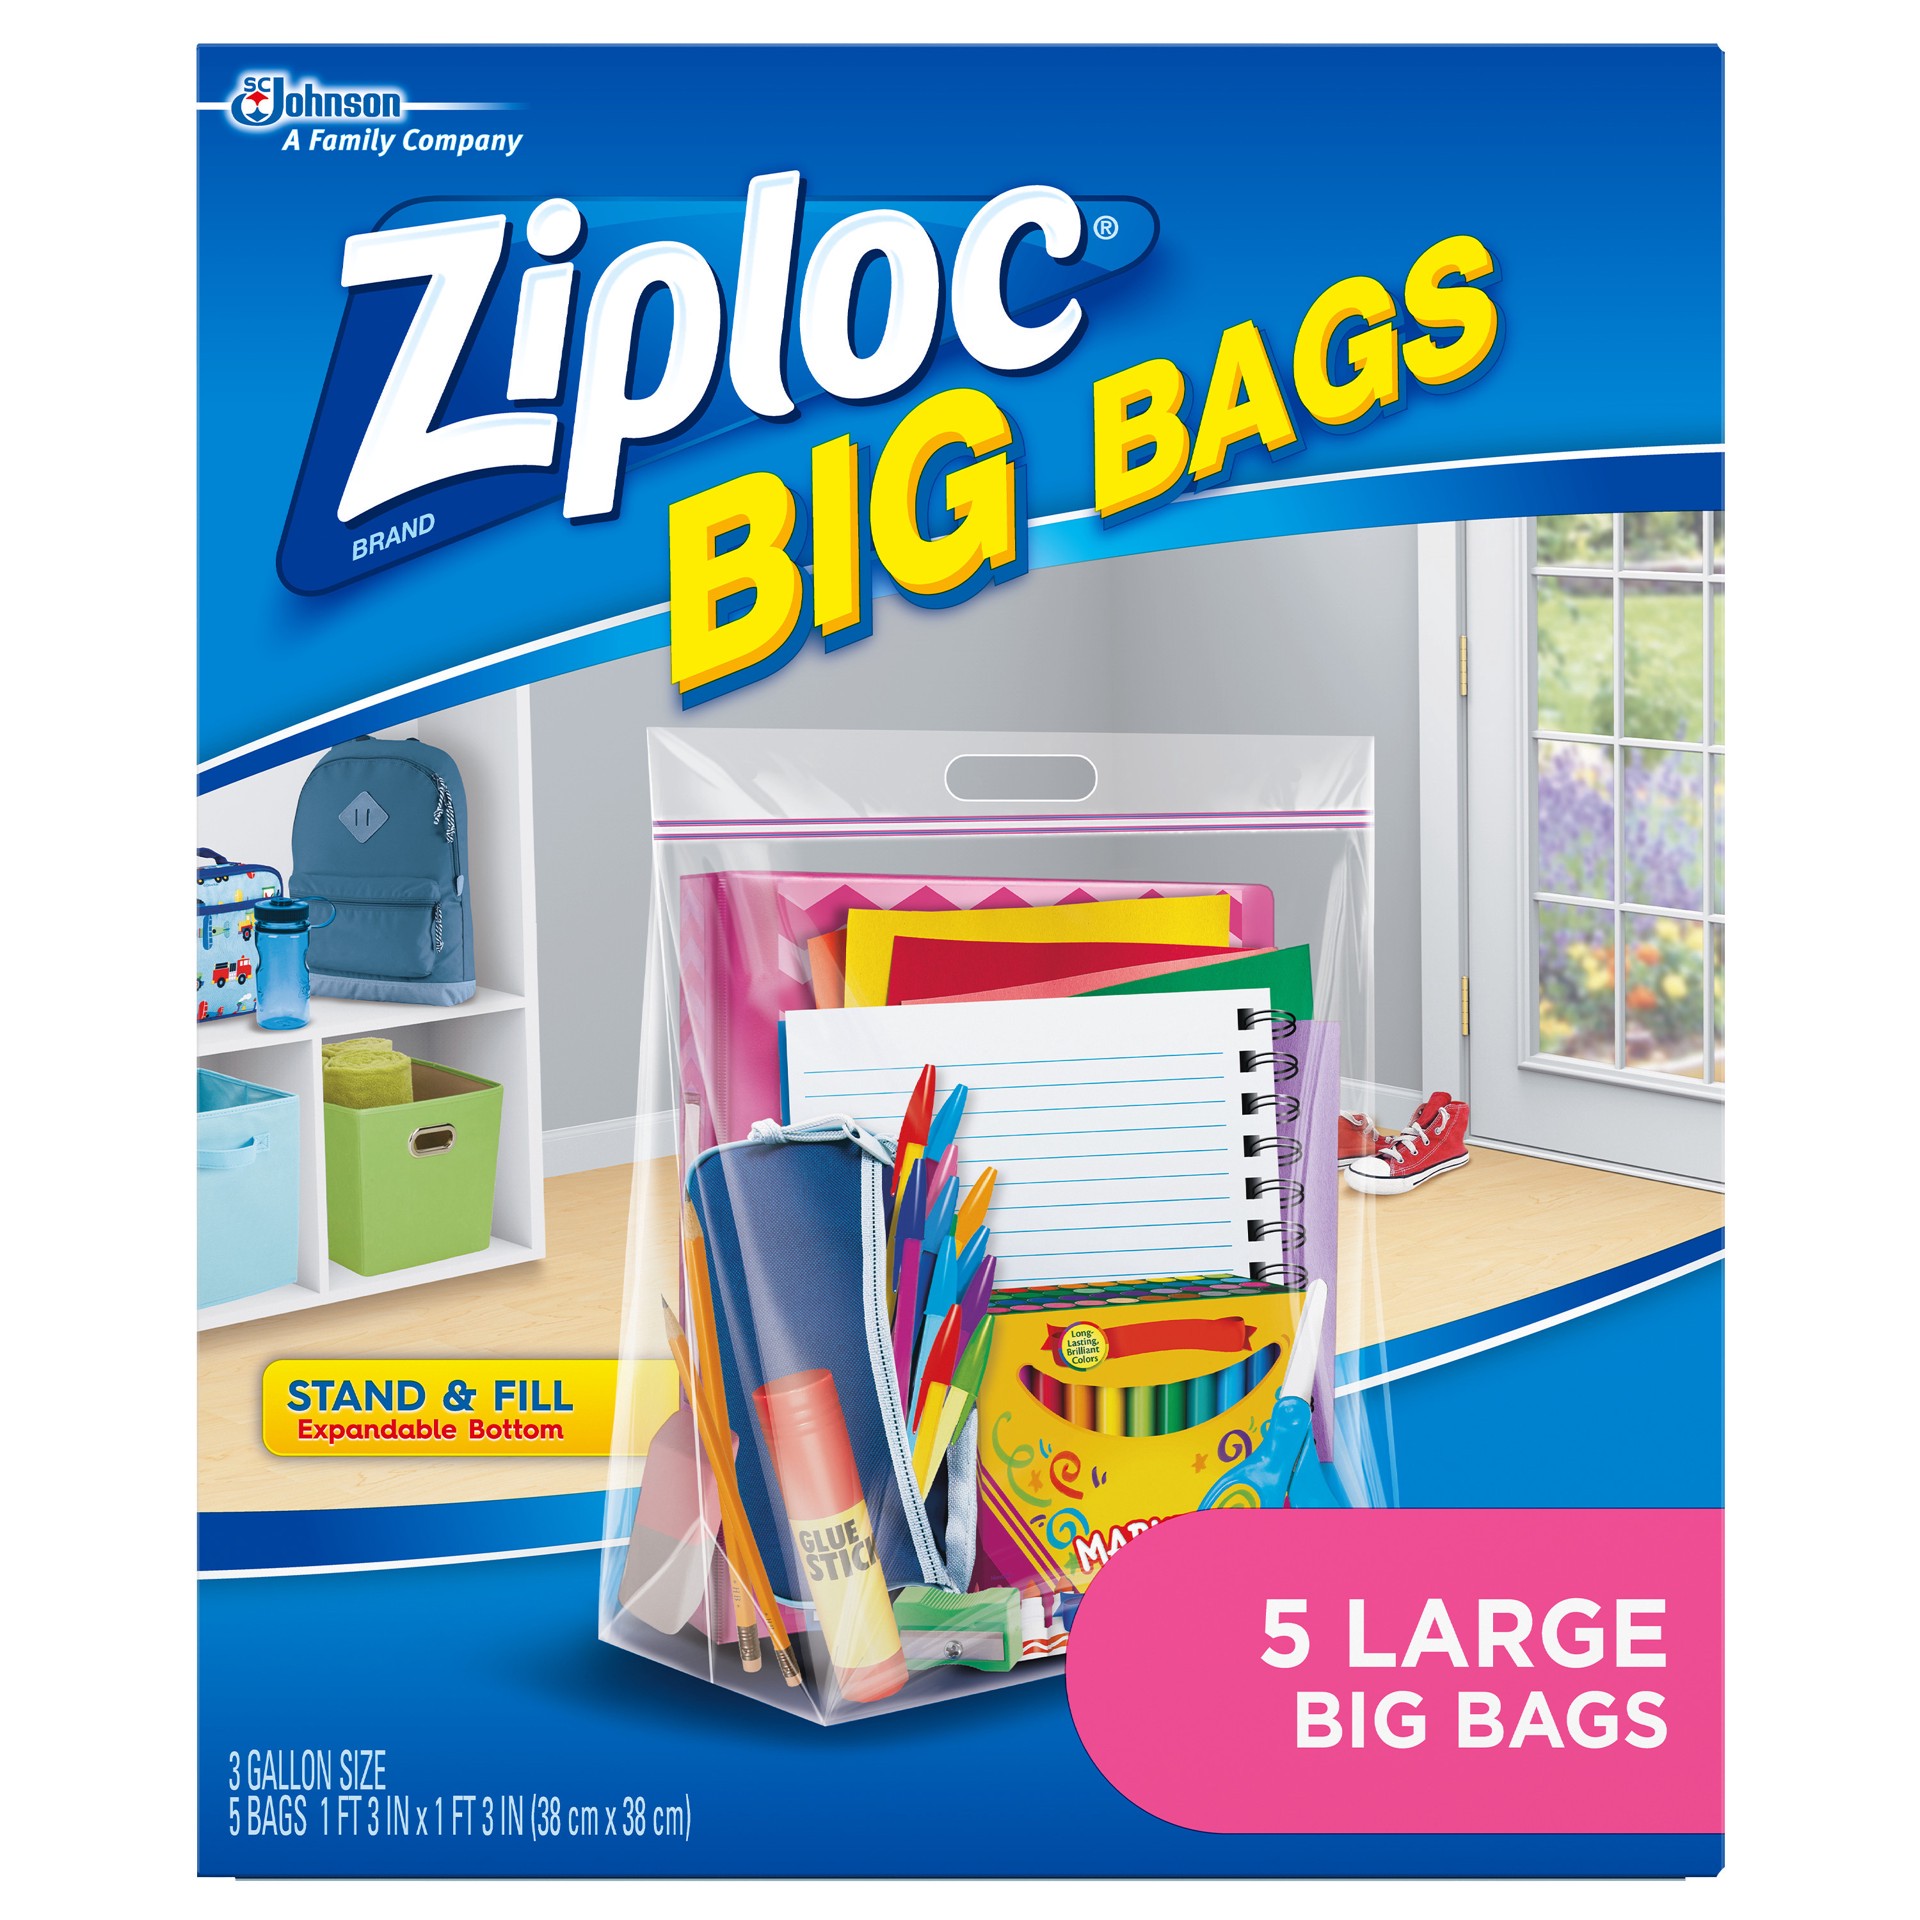 slide 5 of 5, Ziploc Big Bags, Large, Secure Double Zipper, 5 CT,  Expandable Bottom, Heavy-Duty Plastic, Built-In Handles, Flexible Shape to Fit Where Storage Boxes Can't, 5 ct